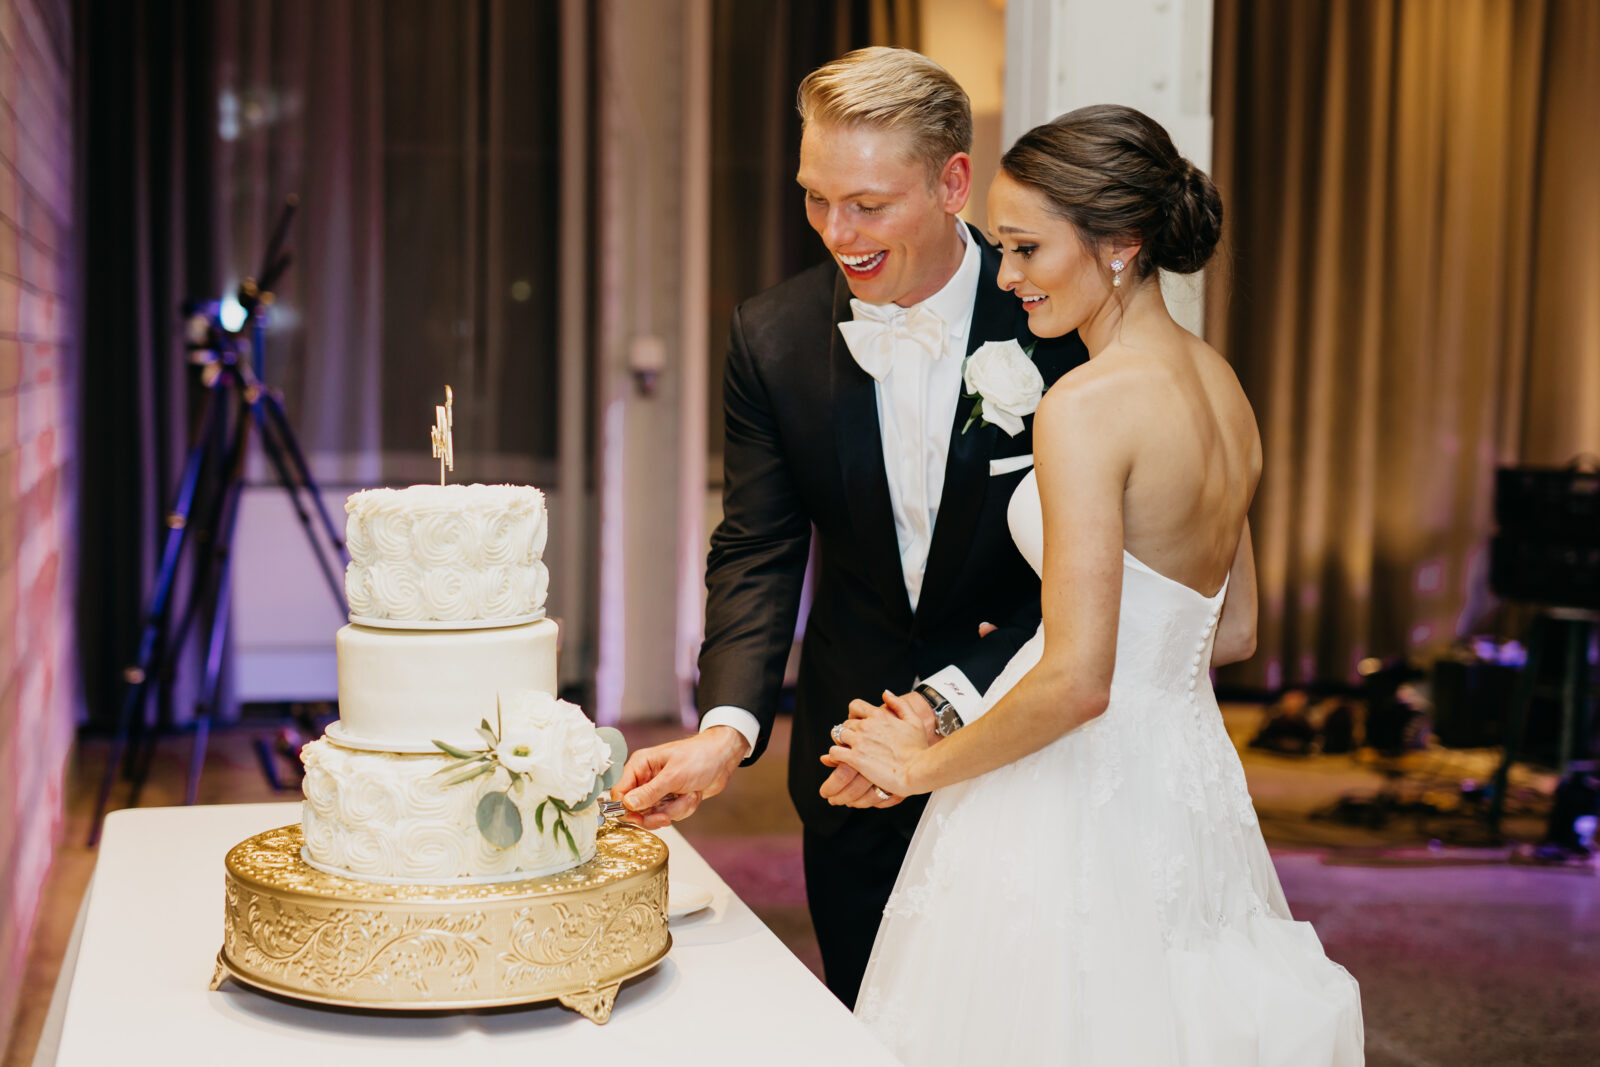 A photo of the bride and groom slicing their first piece of cake as newlyweds.